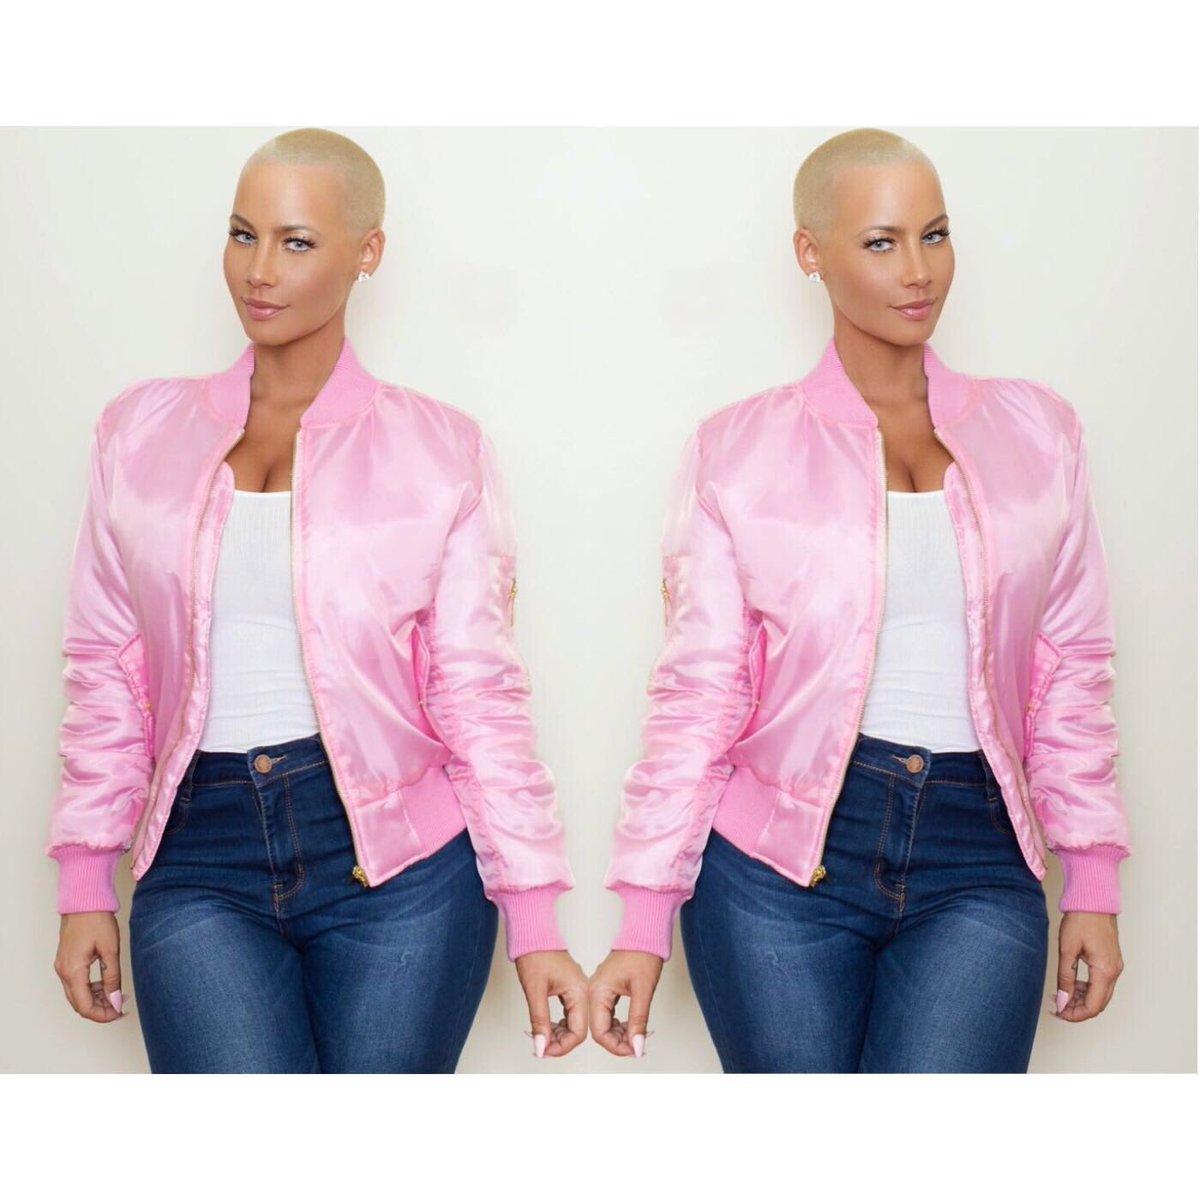 My Bomber jacket from @lasulaboutique is soo dope ???? https://t.co/rS3XWQzzGS #muva https://t.co/4AnKkekKDT